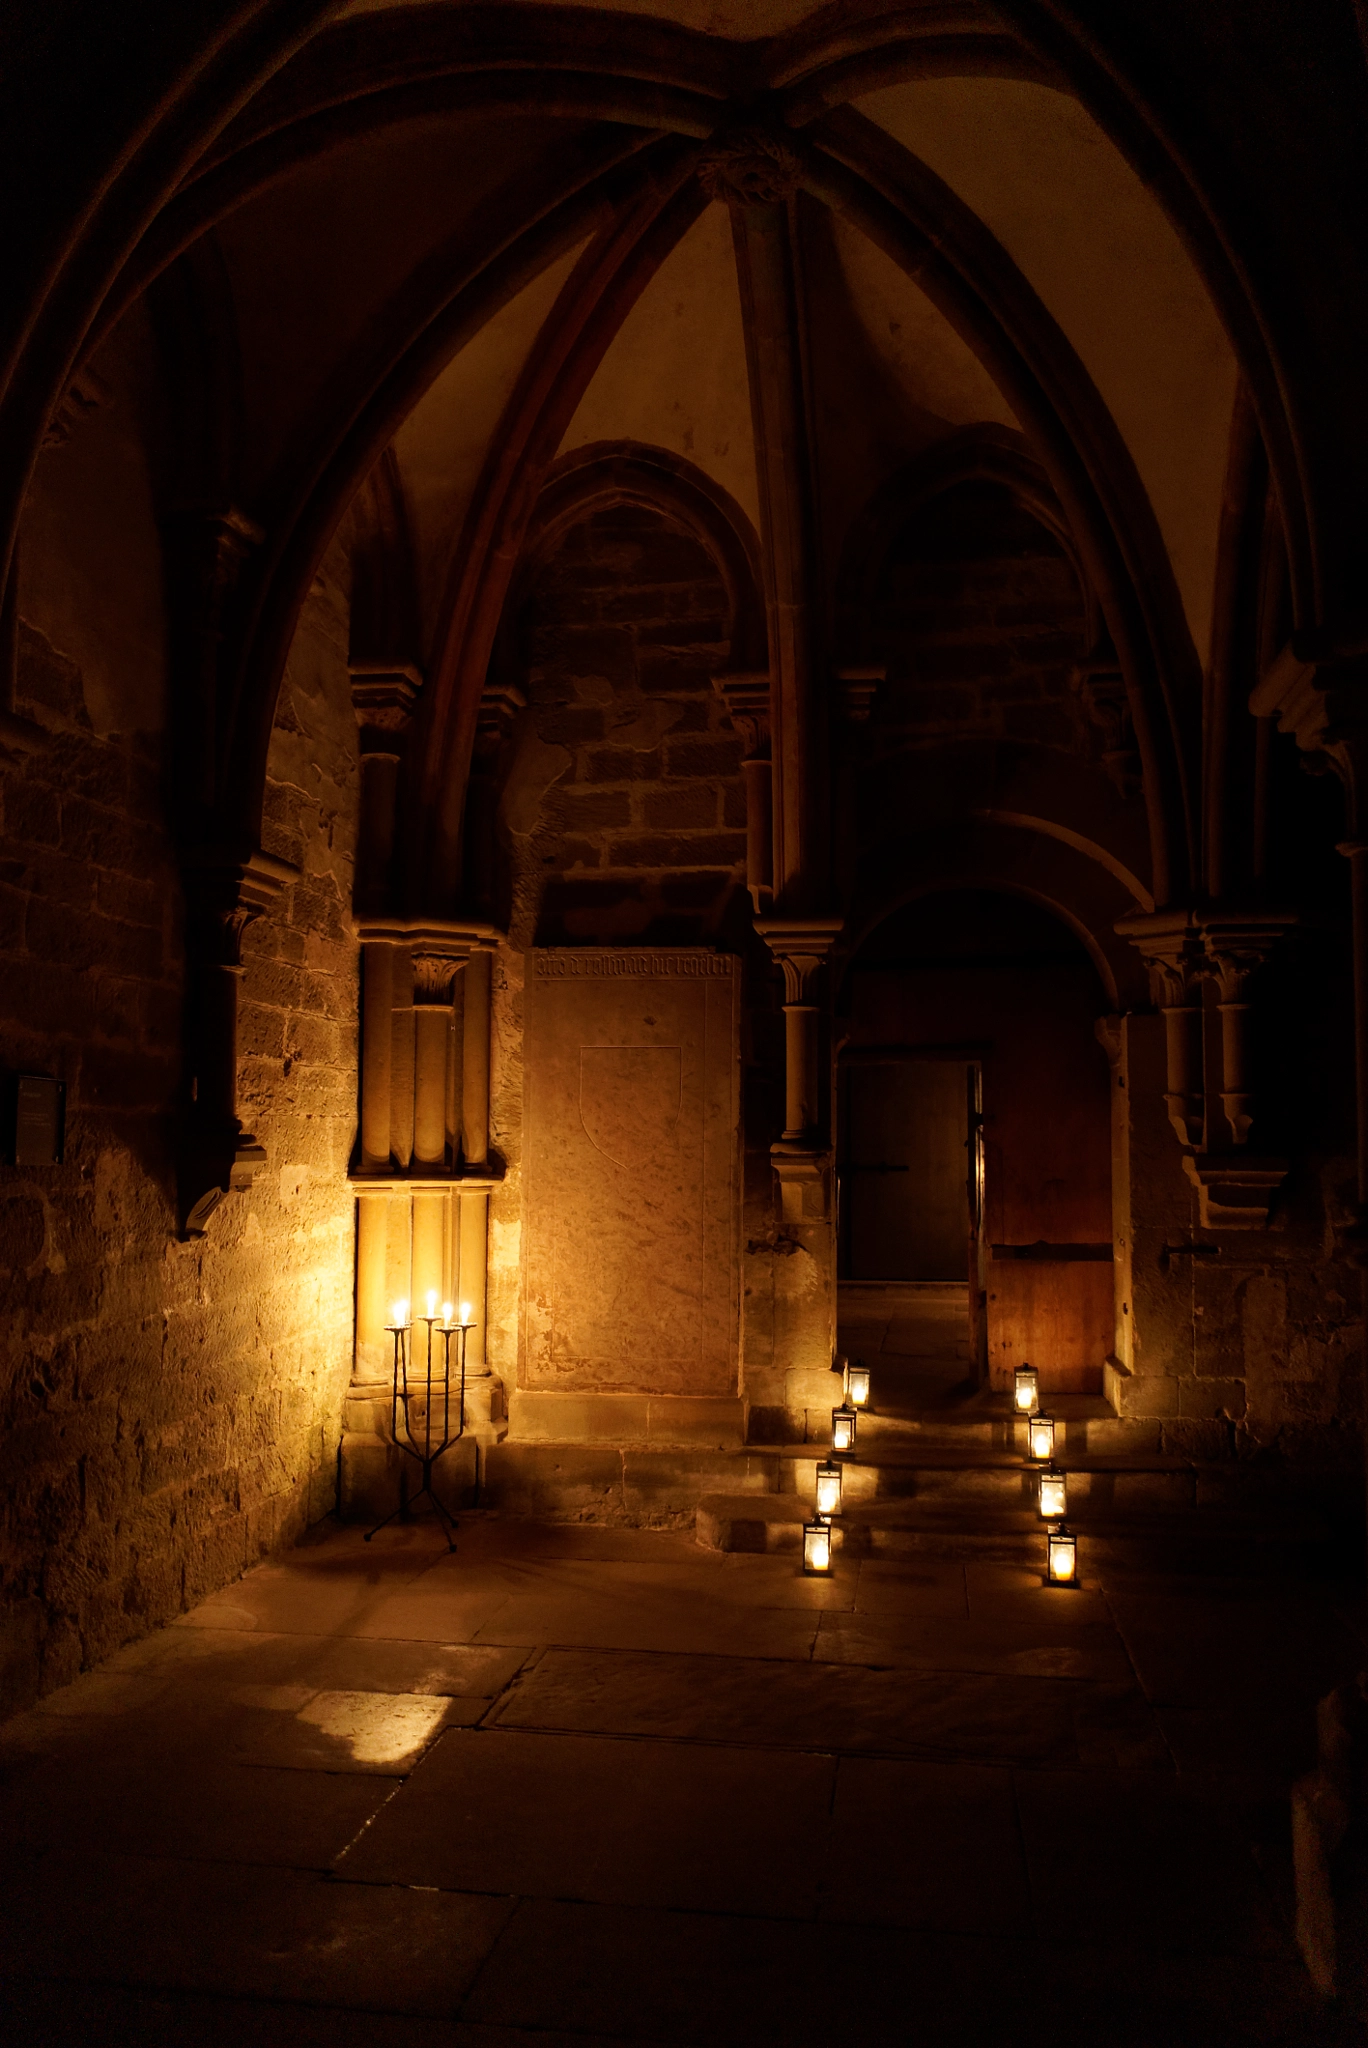 Sony a7S + Sony FE 28mm F2 sample photo. Ancient monastery "maulbronn" in candle light photography